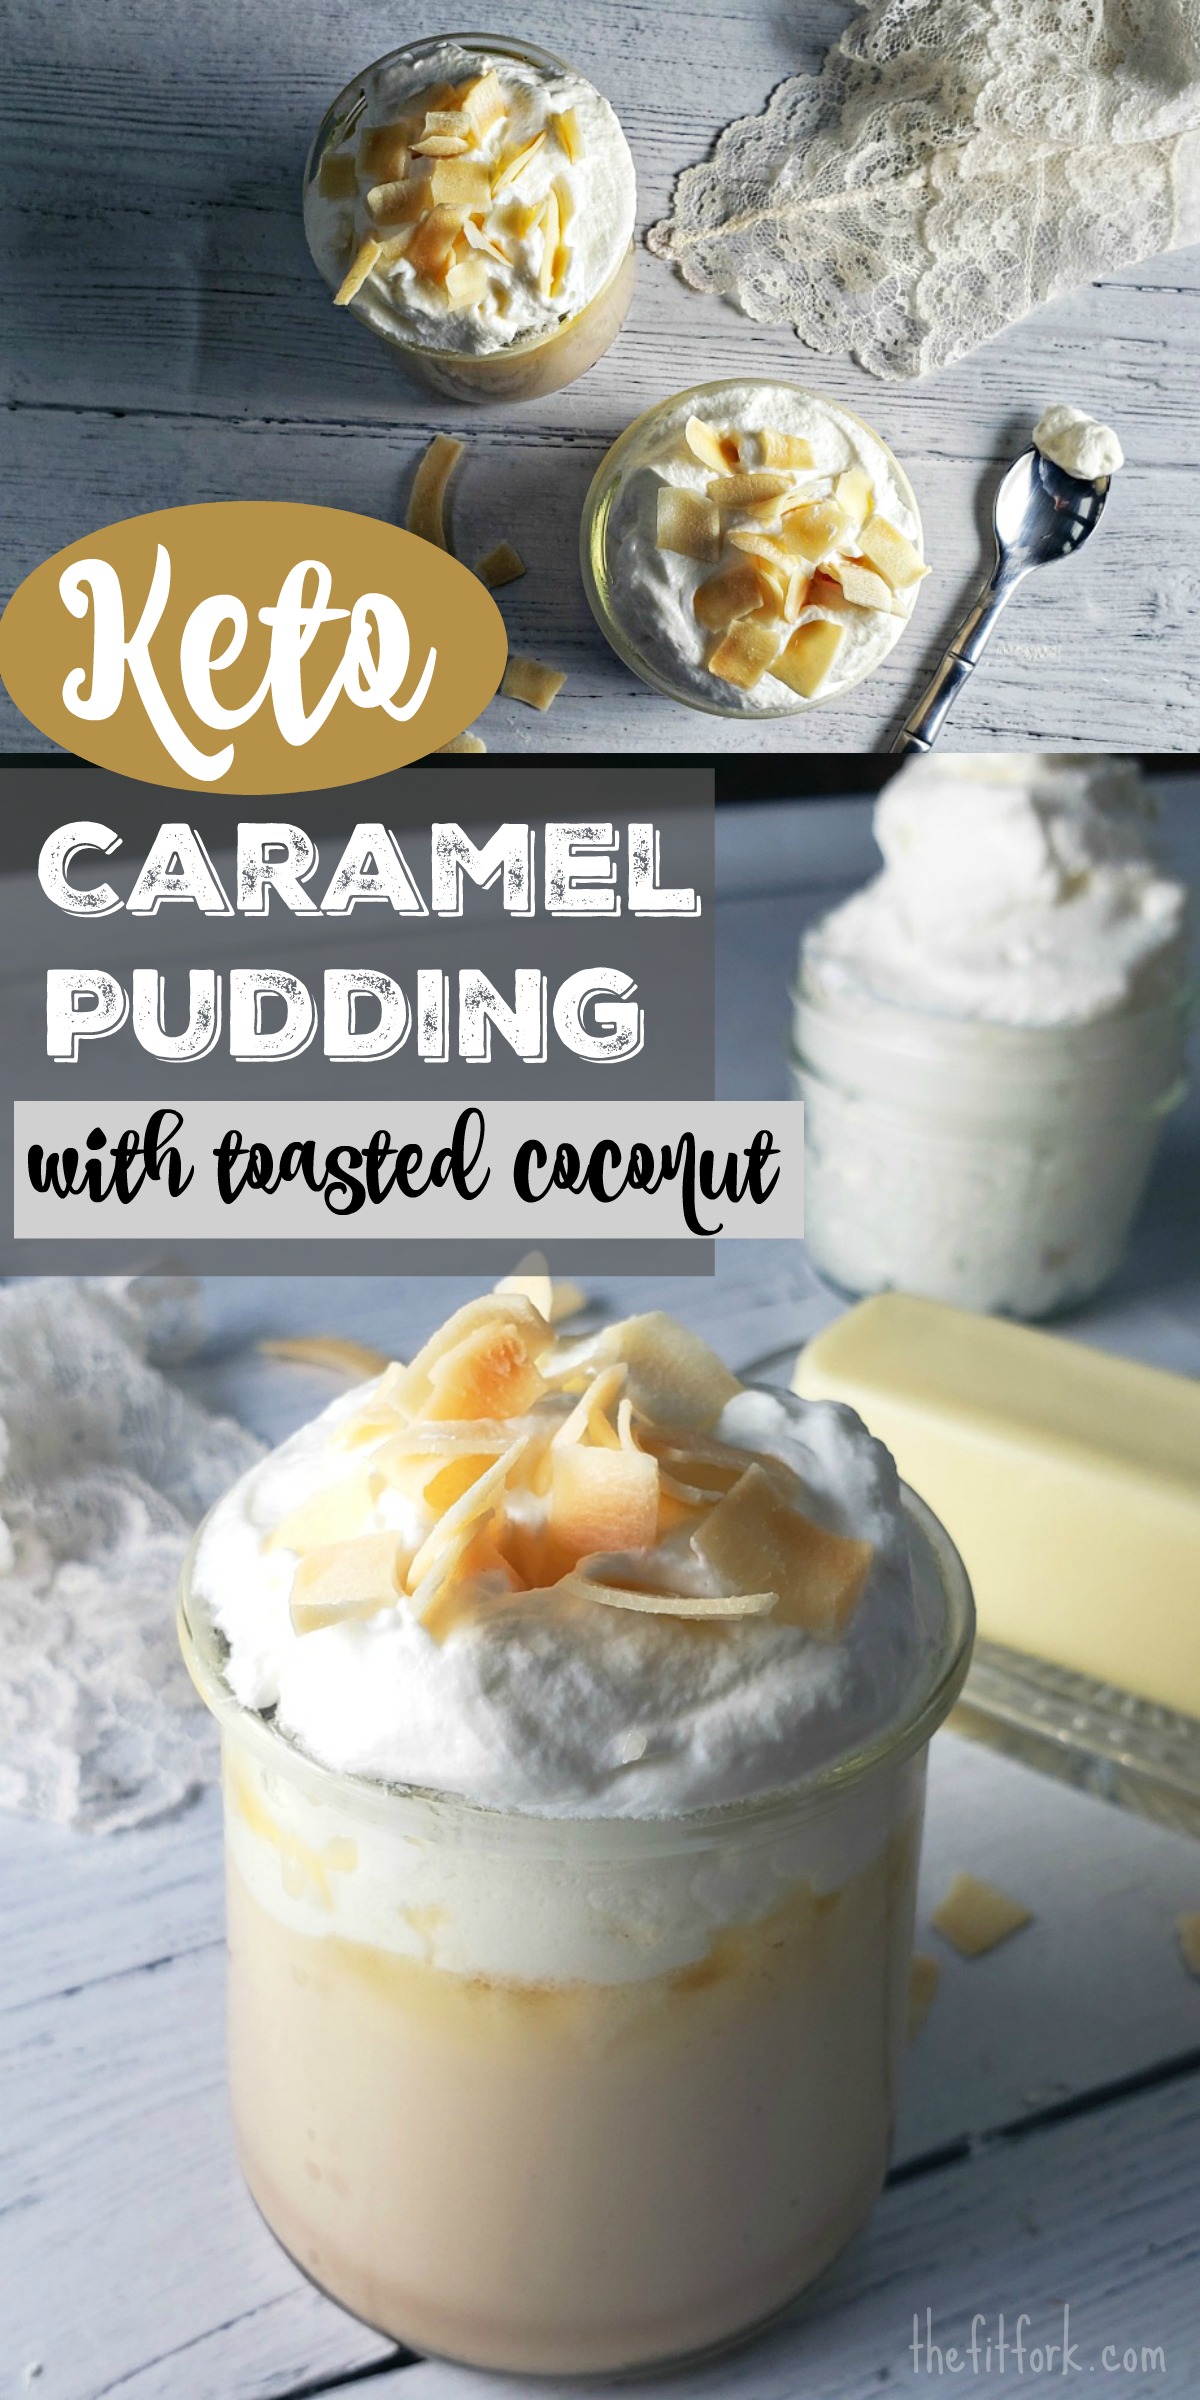 Keto Caramel Pudding with Toasted Coconut - an easy to make, low carb dessert for holiday meal and everyday entertaining.